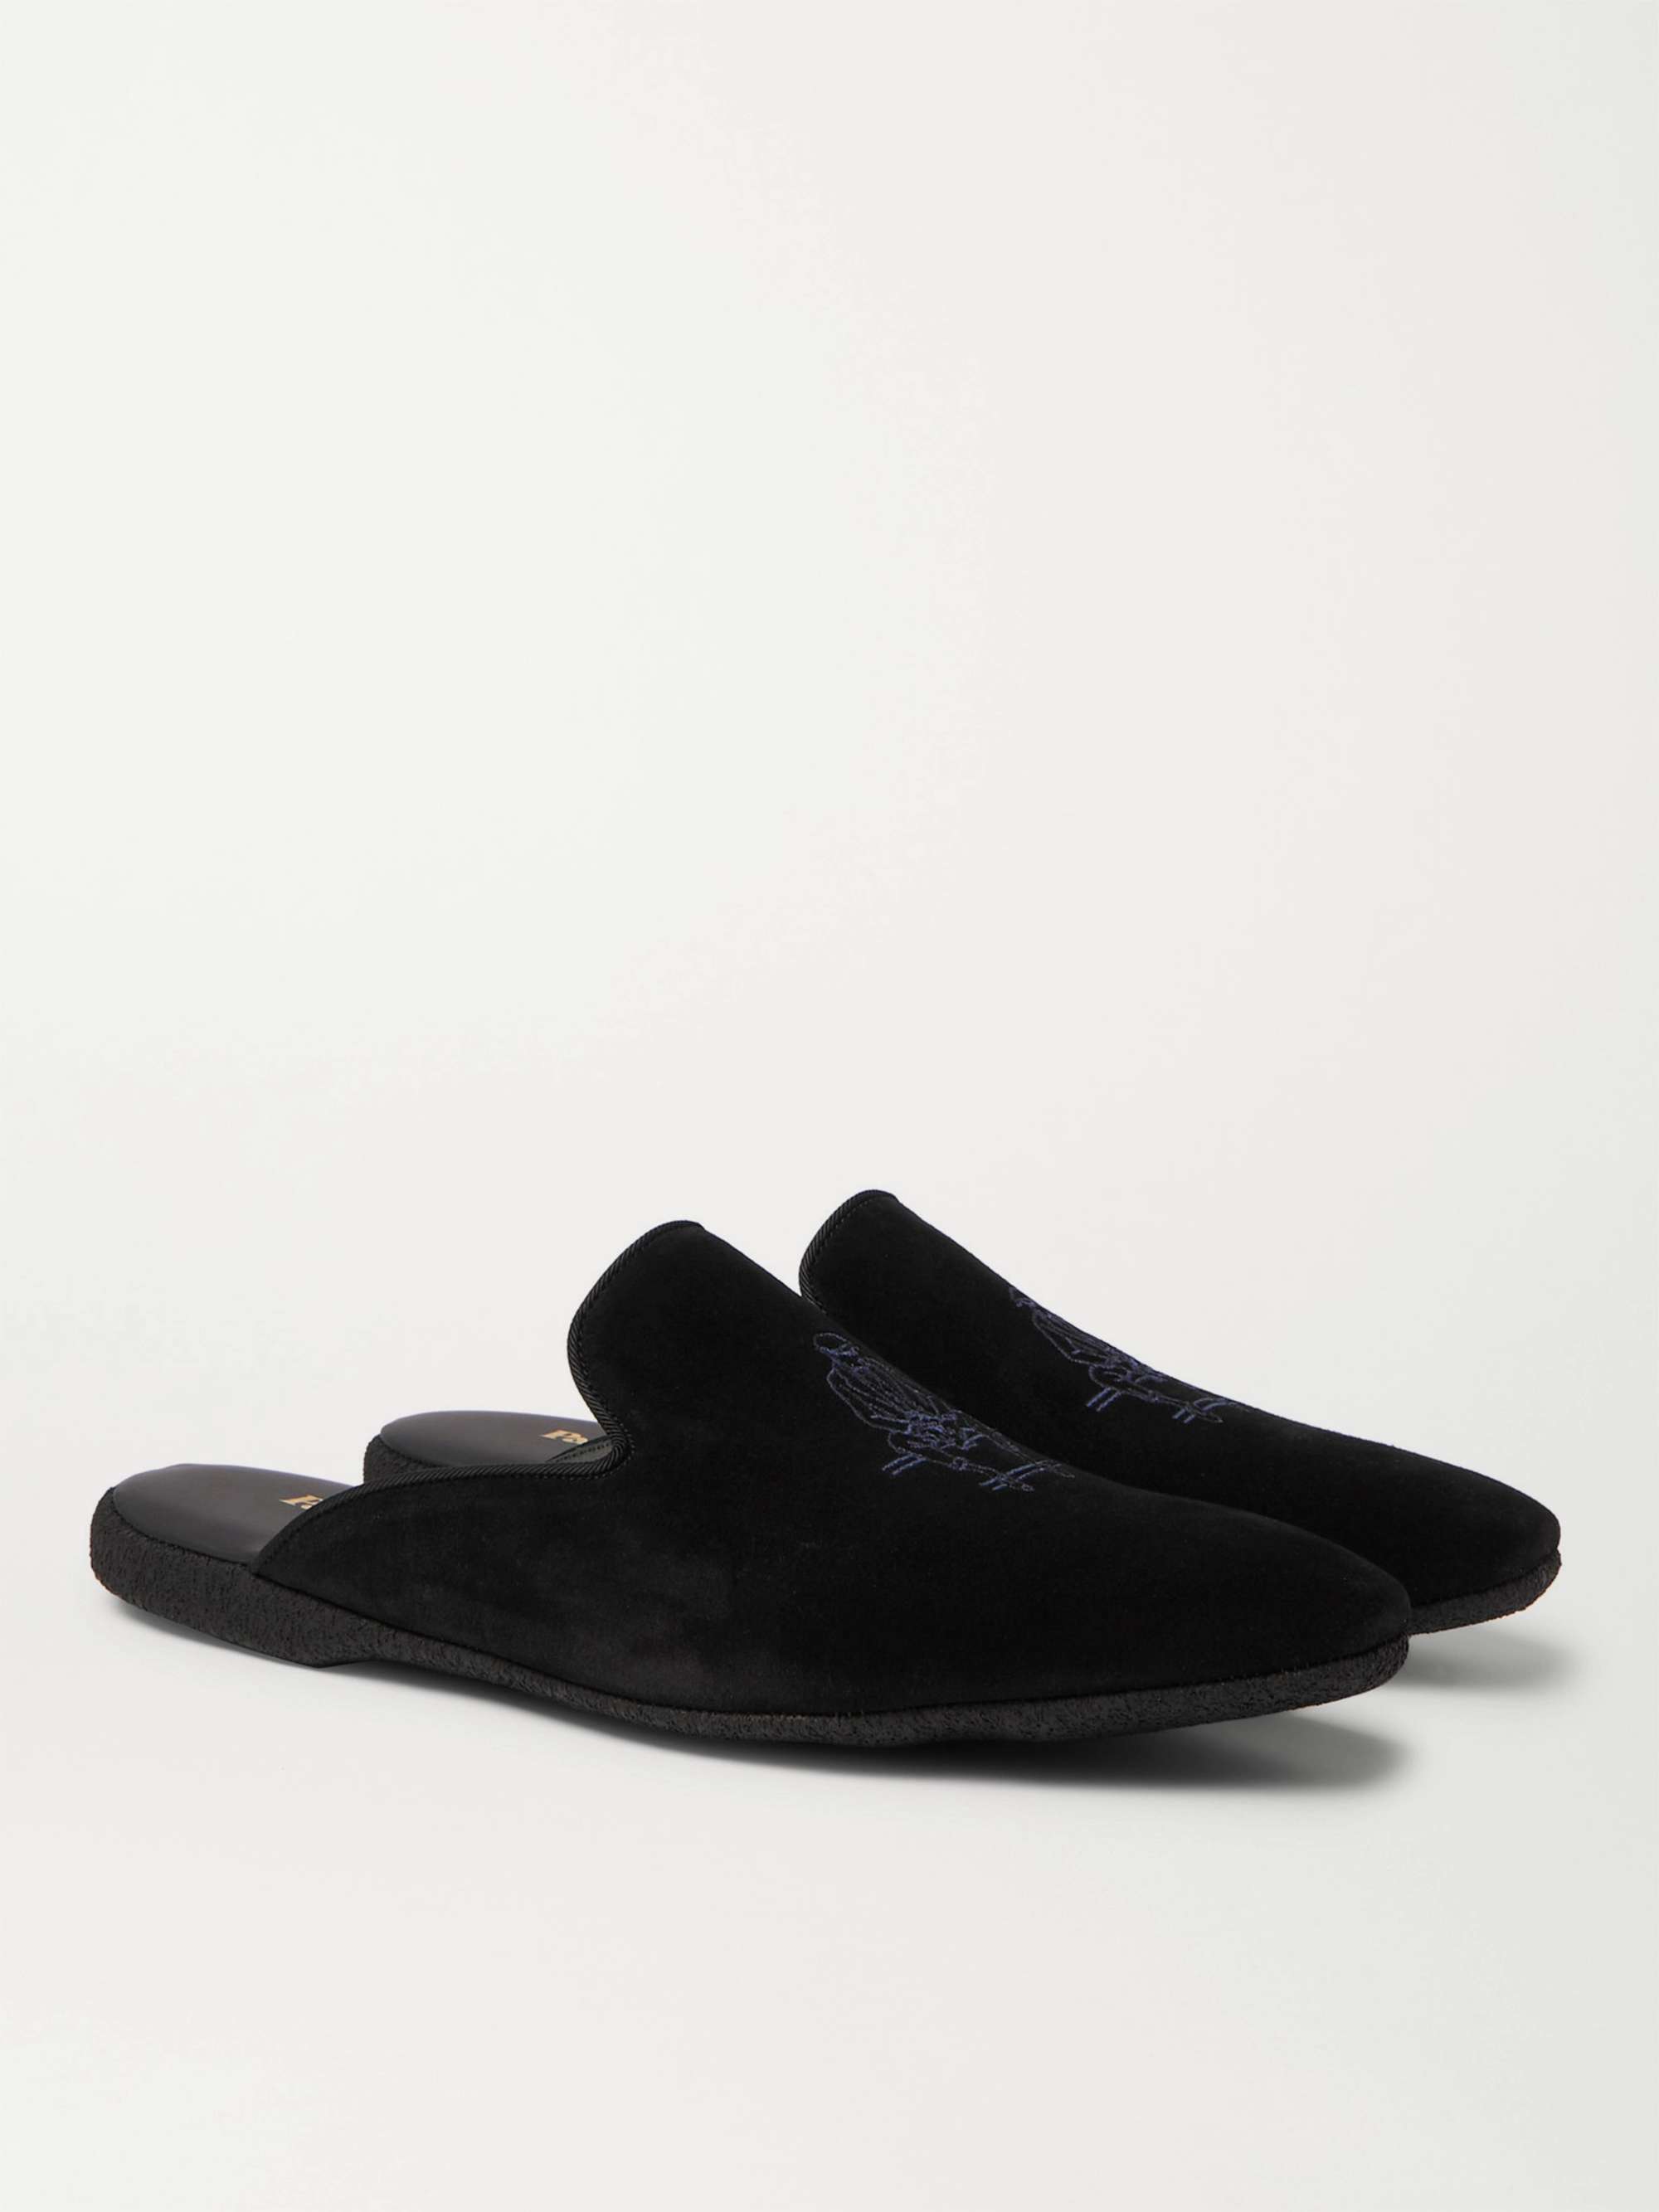 PAUL STUART Hamilton Embroidered Suede Slippers